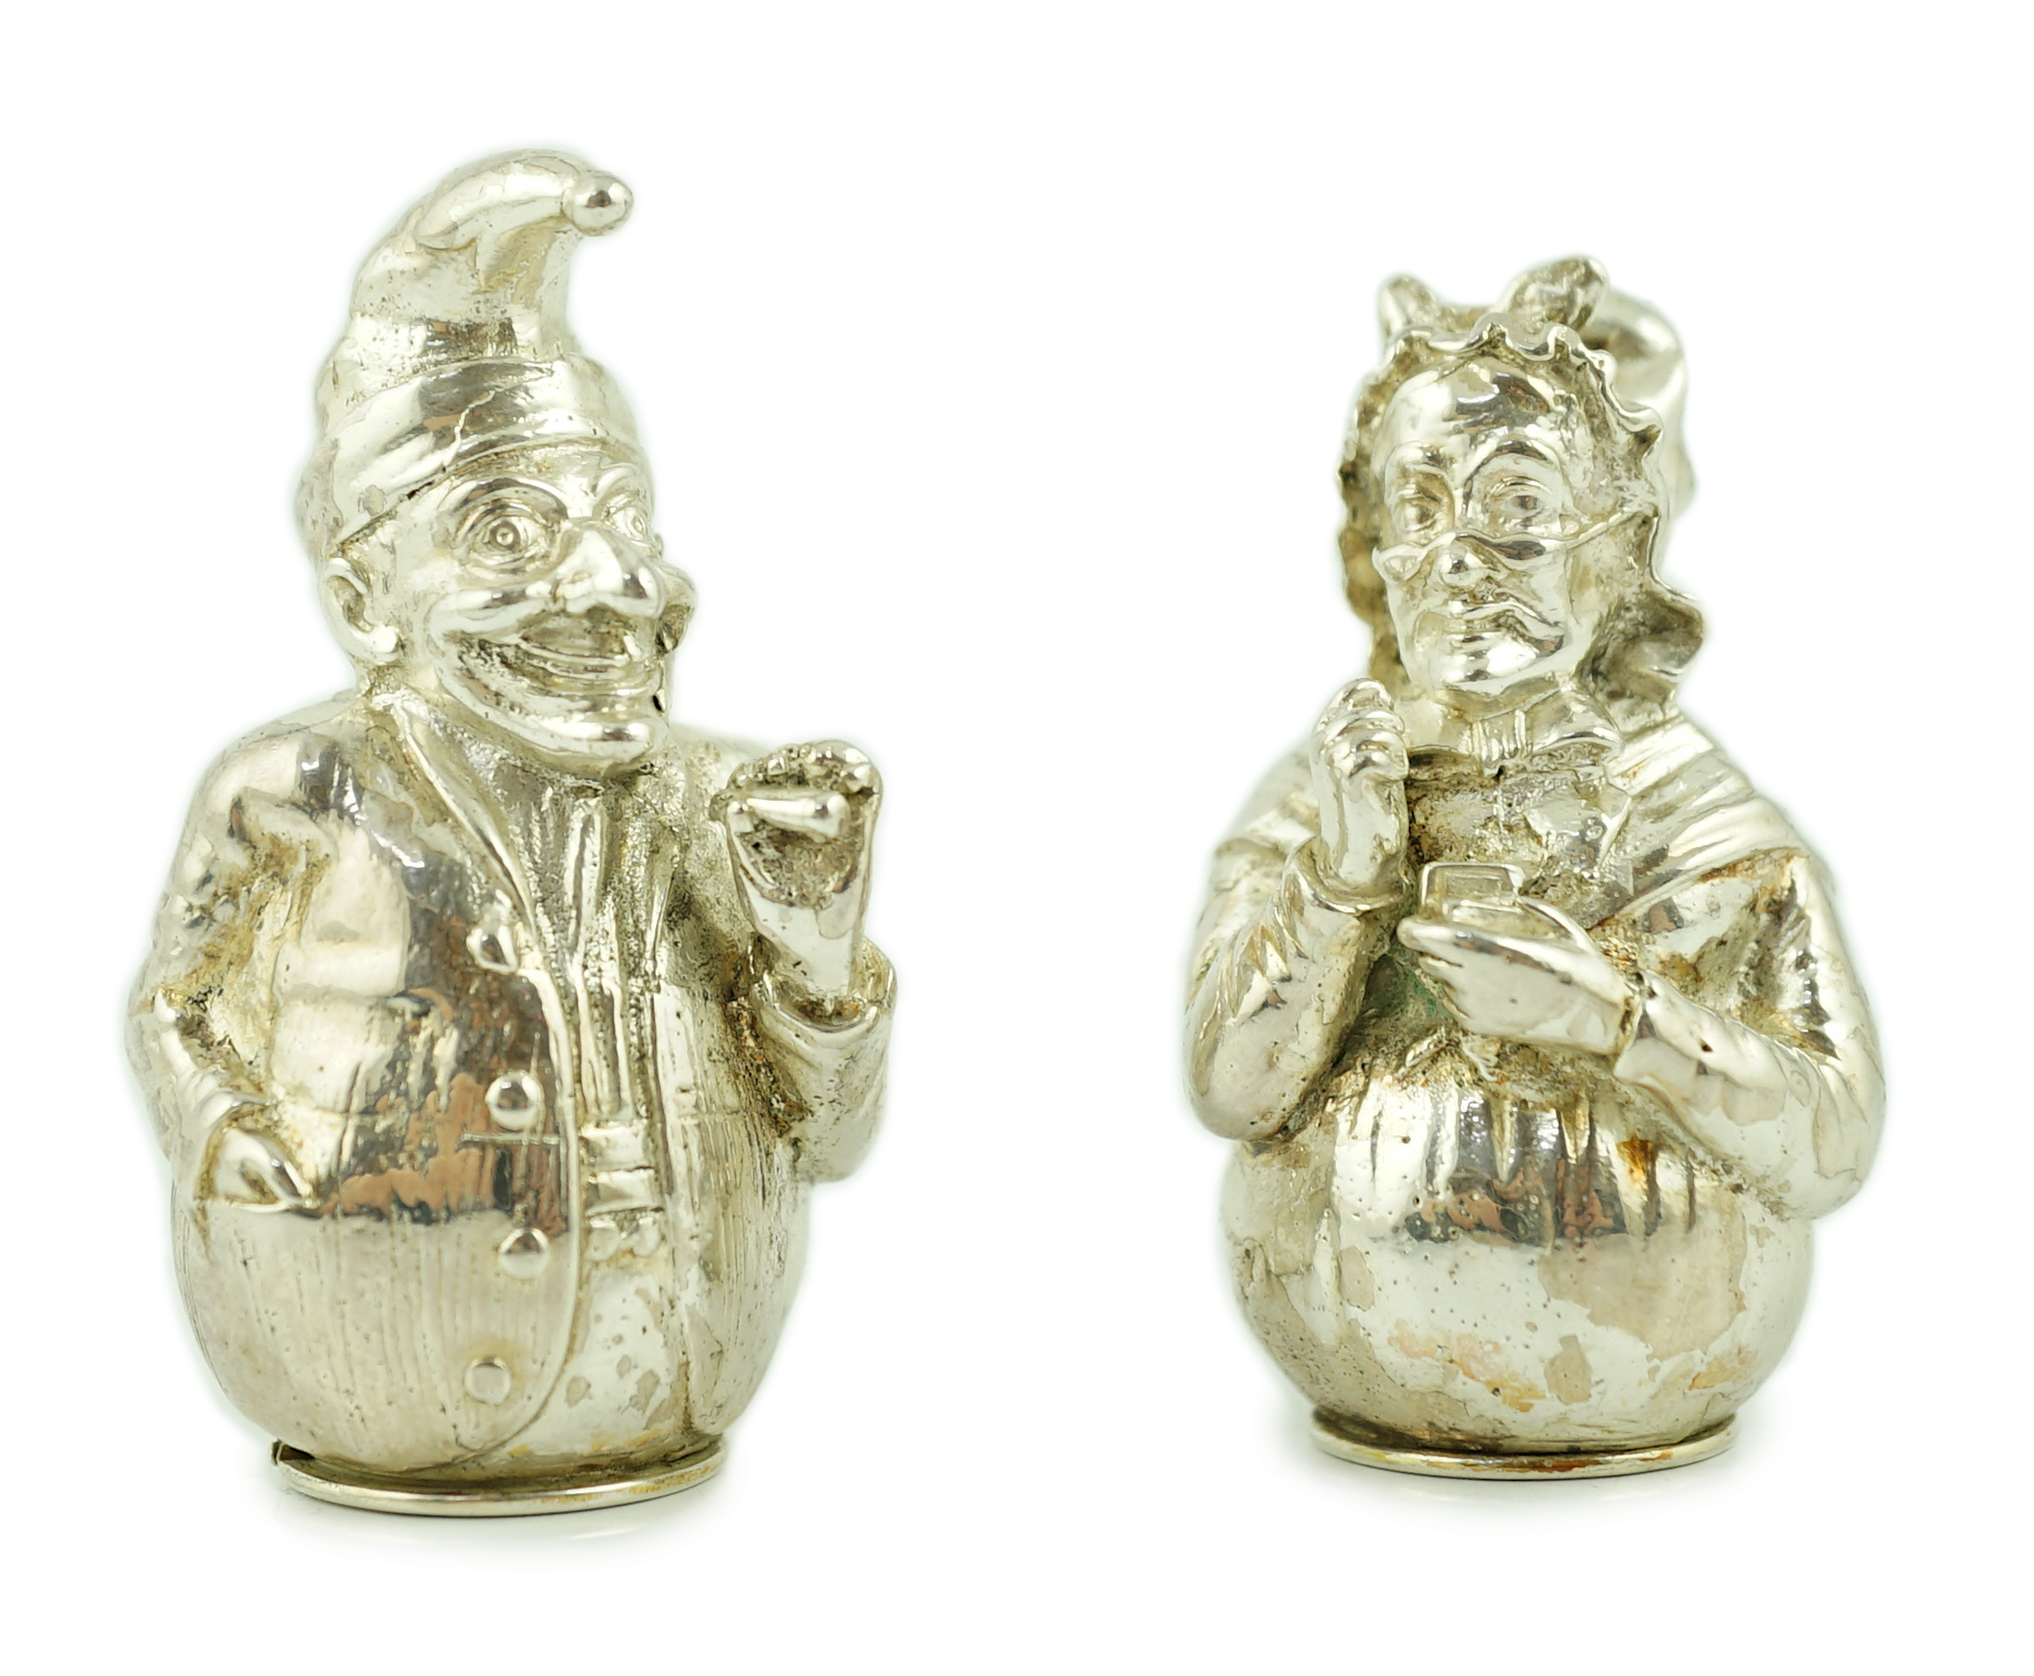 A pair of cast late Victorian novelty silver pepperettes, modelled as Punch and Judy, Edward H. Stockwell